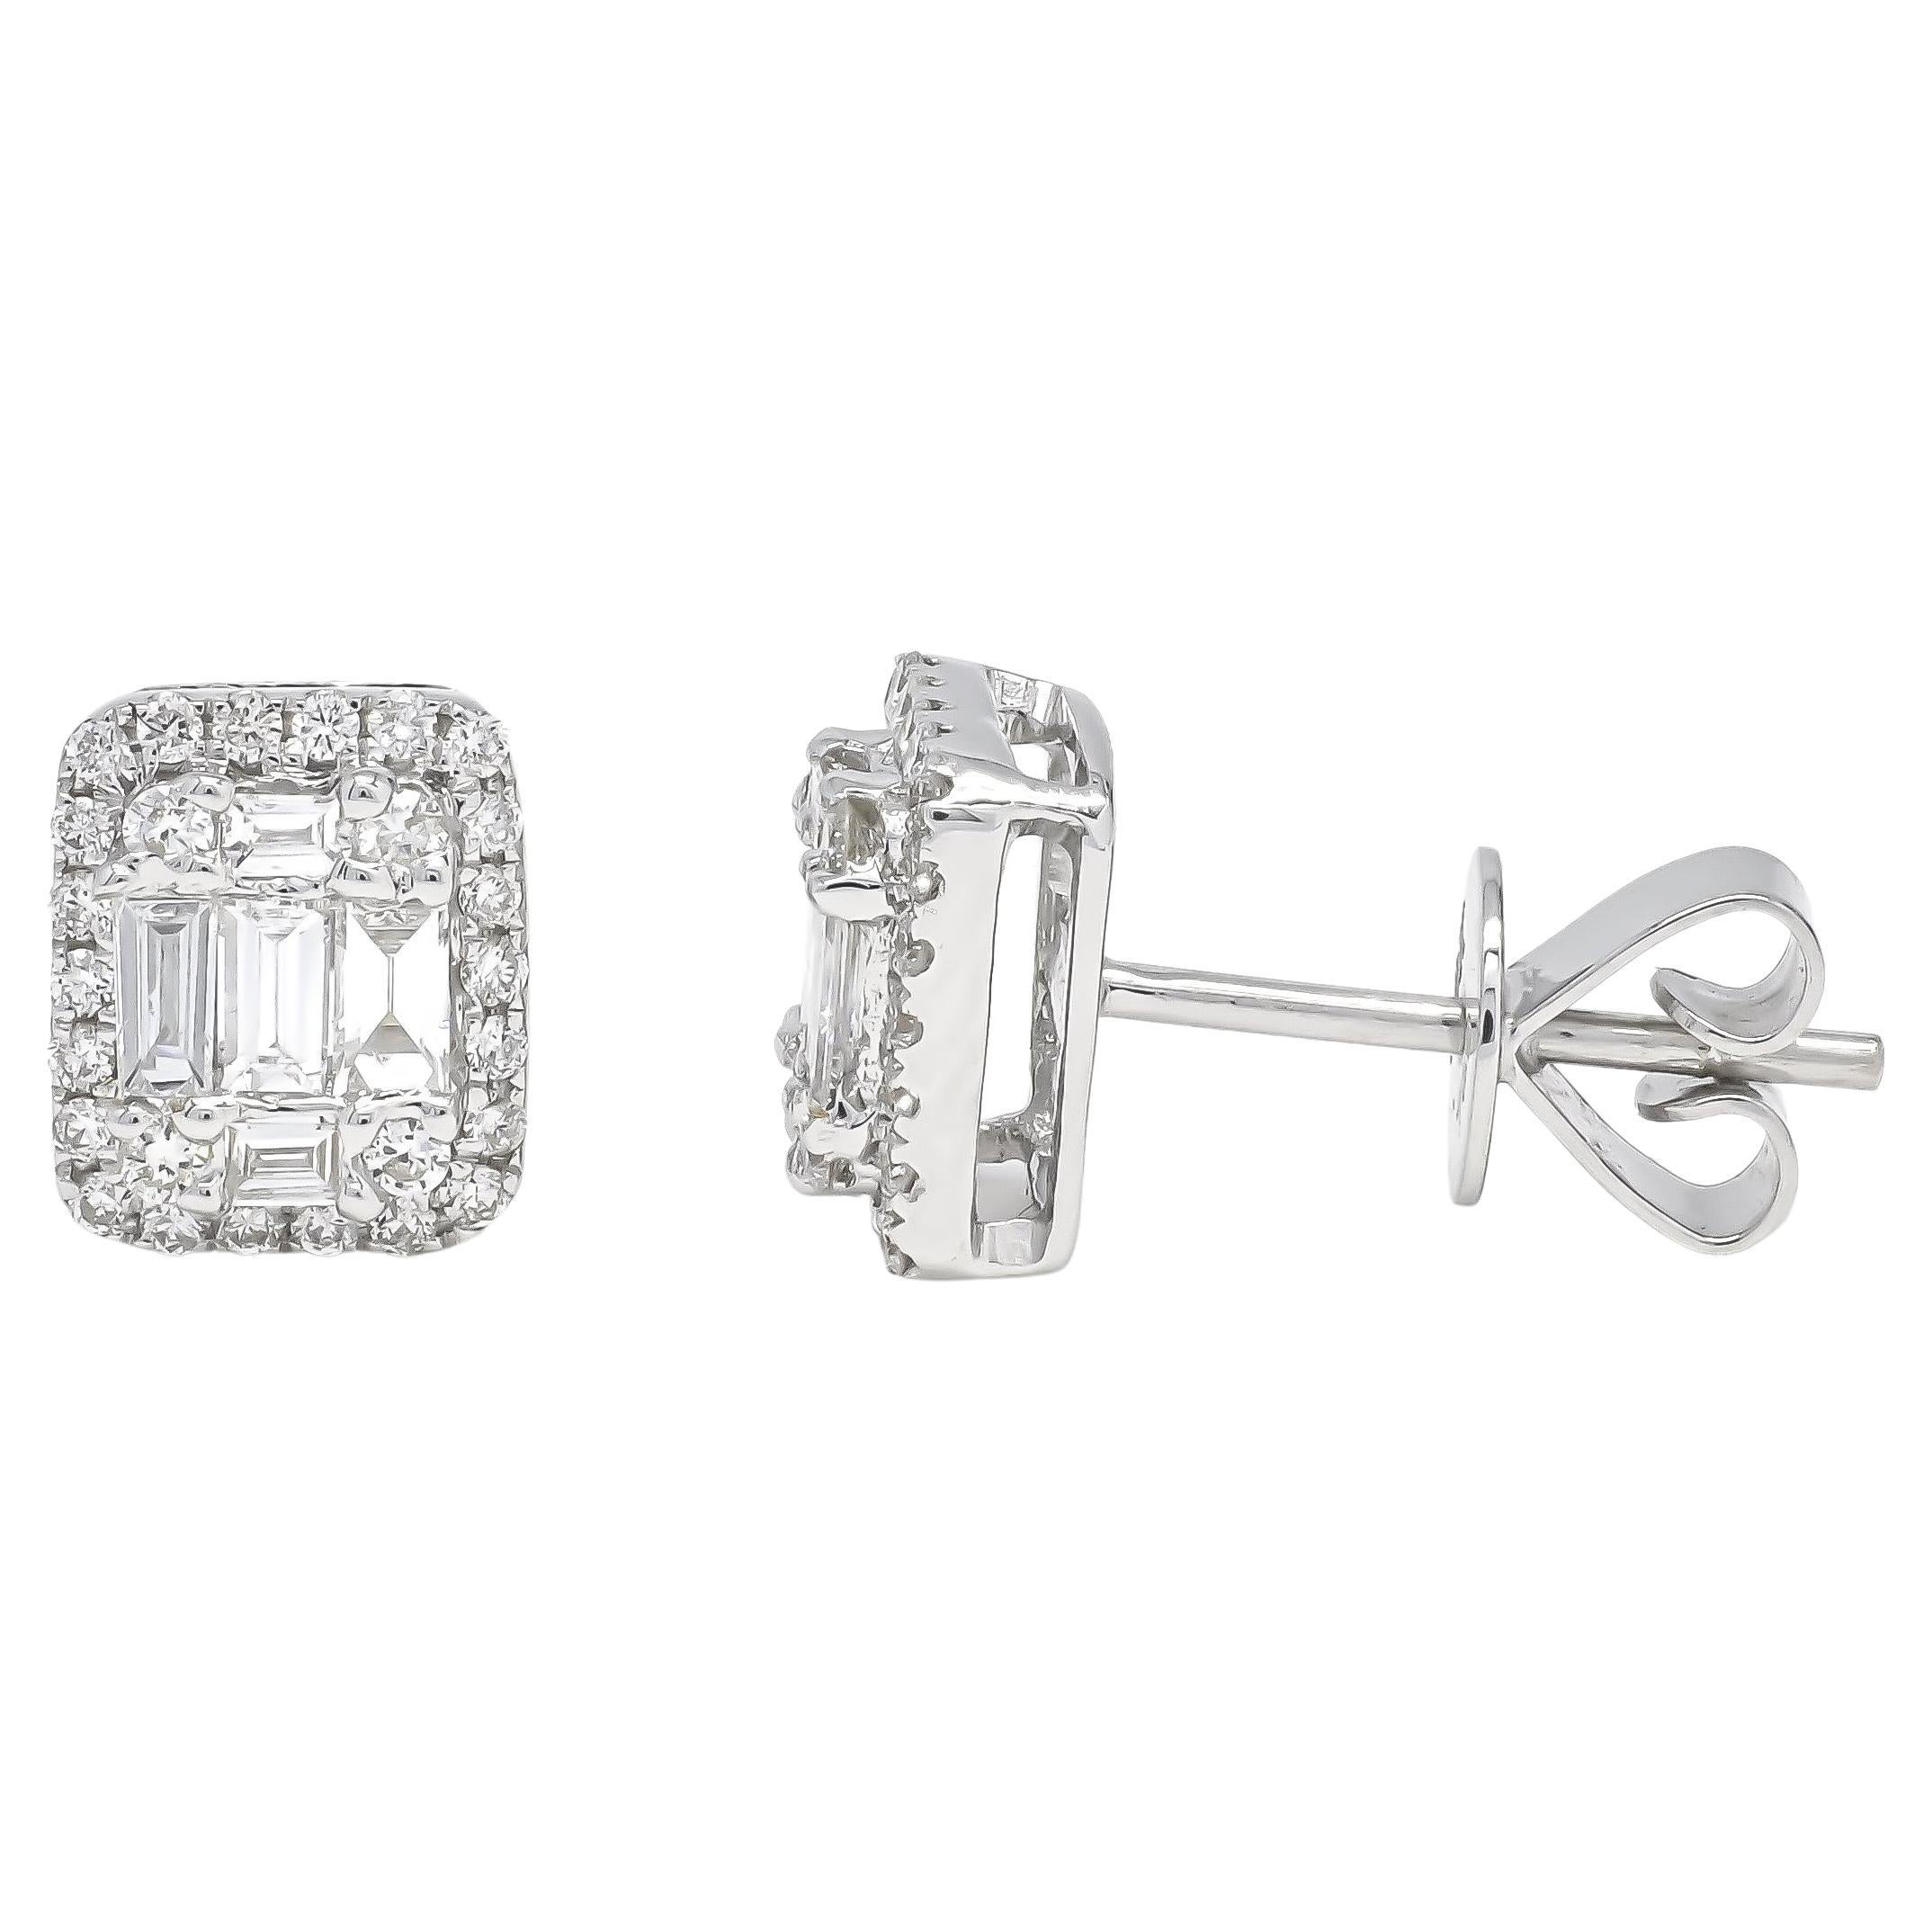 The Baguette and Round Diamond 18 KT Gold Cluster Halo Stud Earrings are the perfect accessory for any woman looking to add a touch of elegance and glamour to her evening wear or to mark a special anniversary.

These stunning earrings feature a